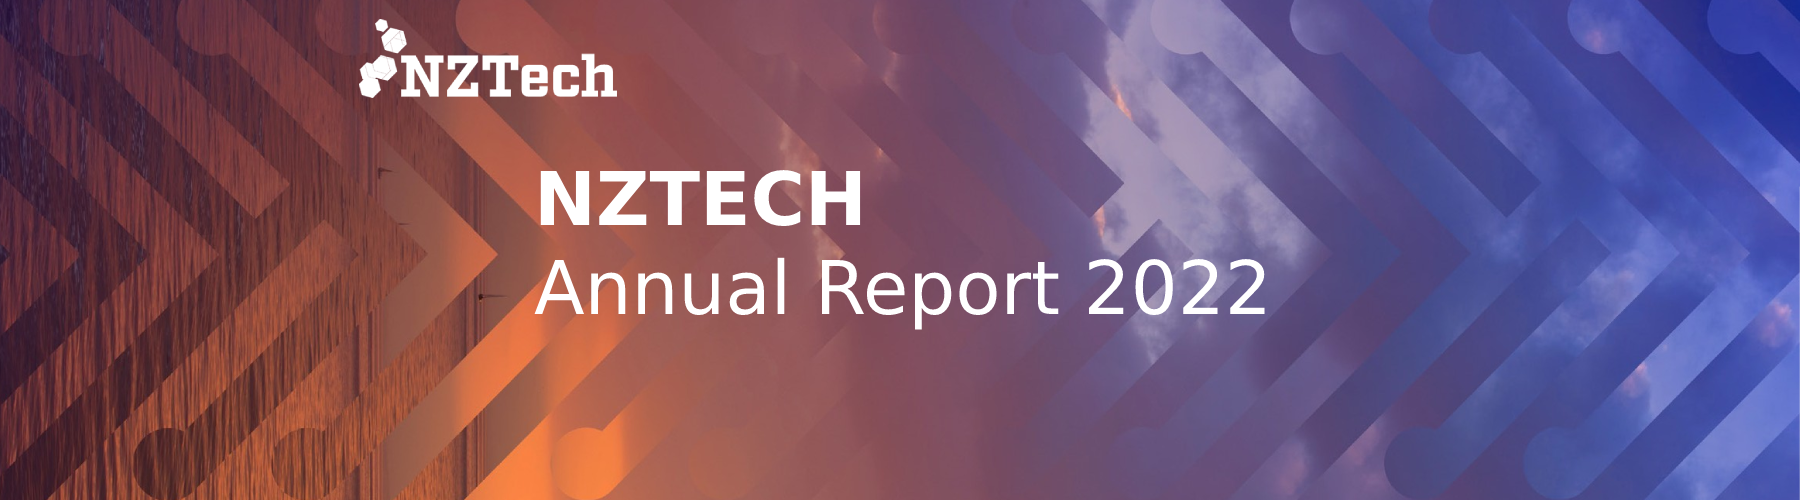 nztech annual report 2022